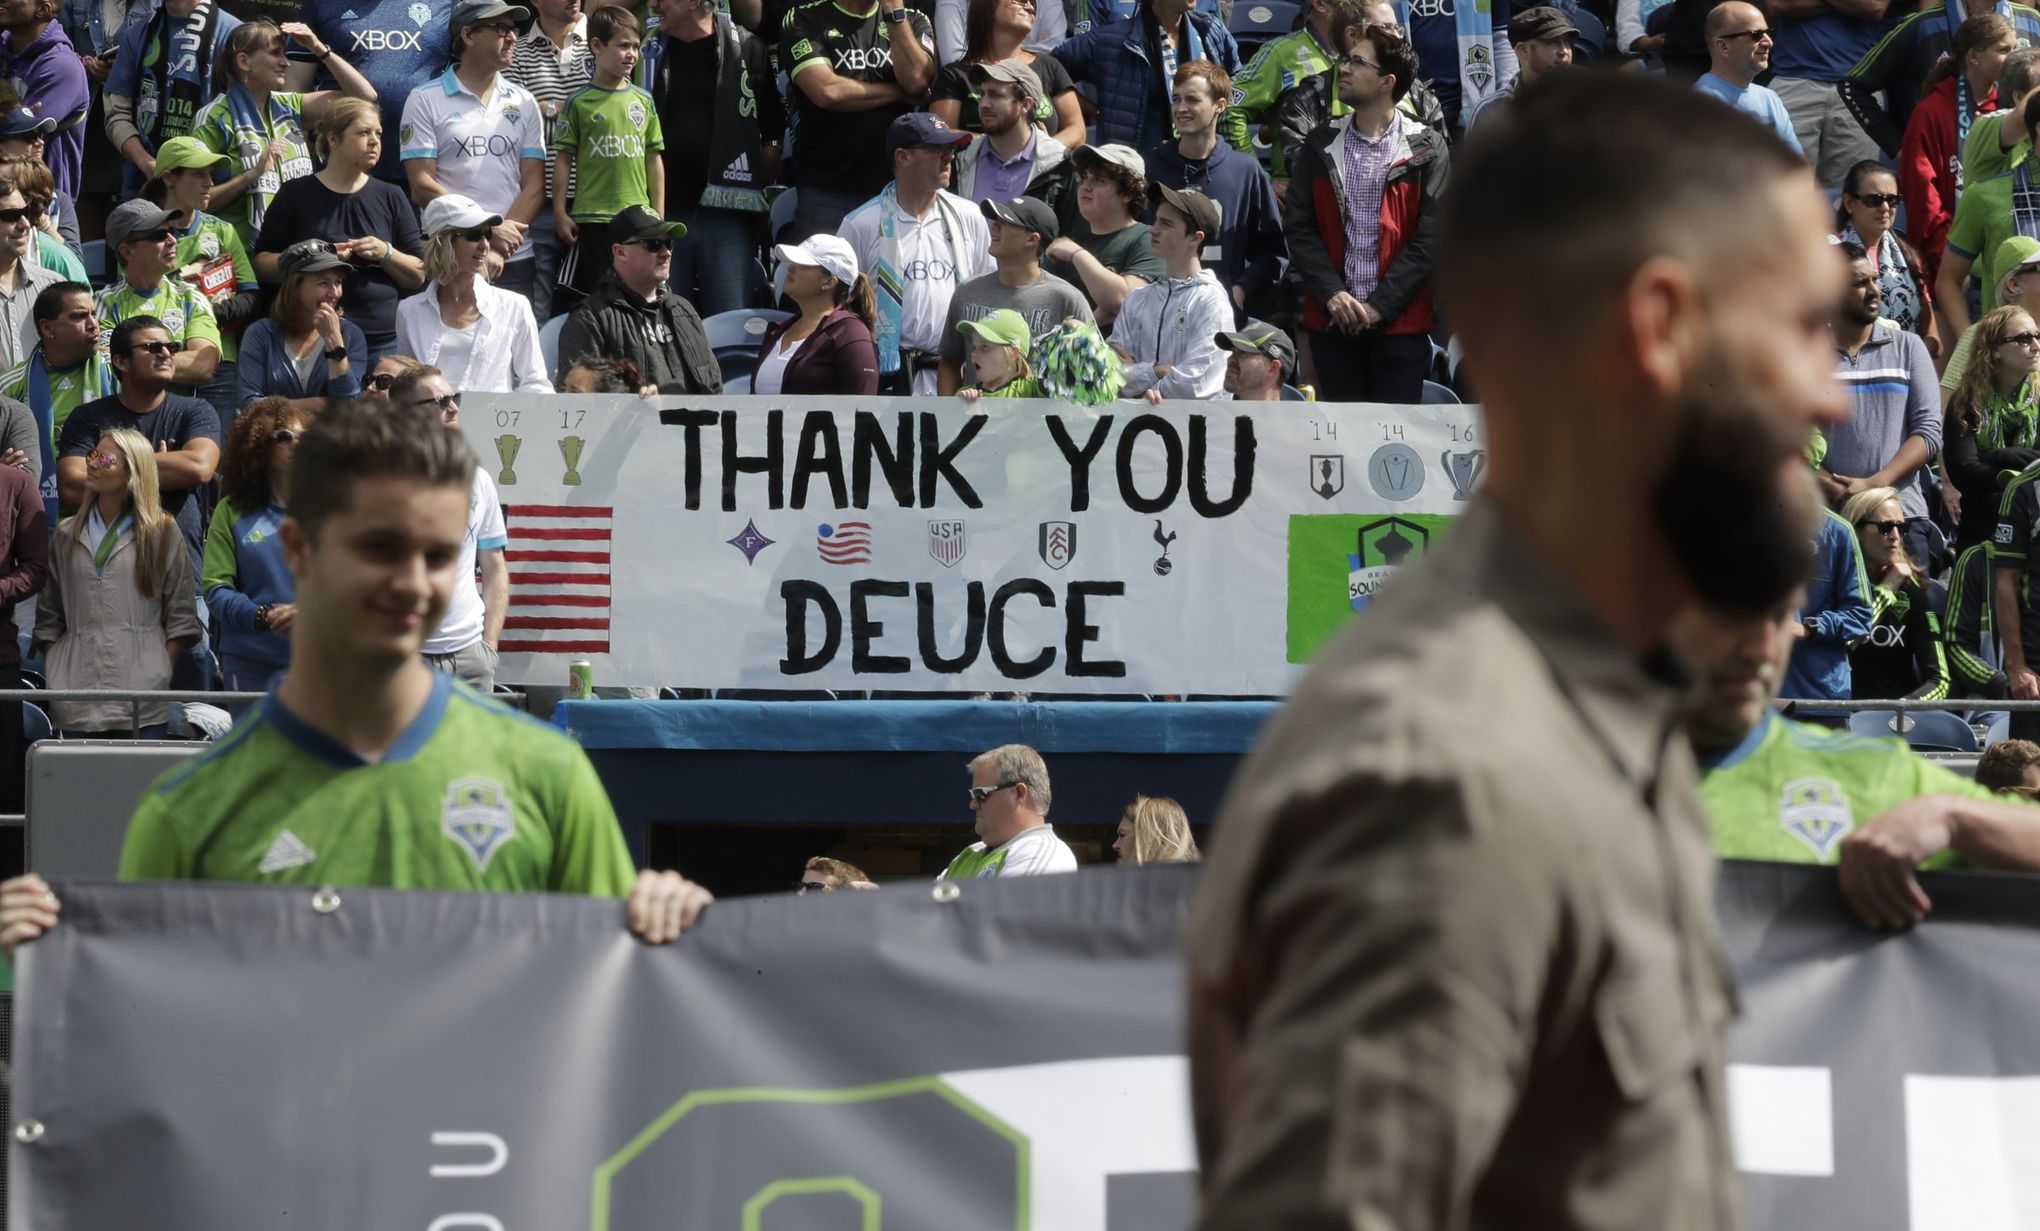 Sounders vs. Whitecaps: Will this be Clint Dempsey's farewell